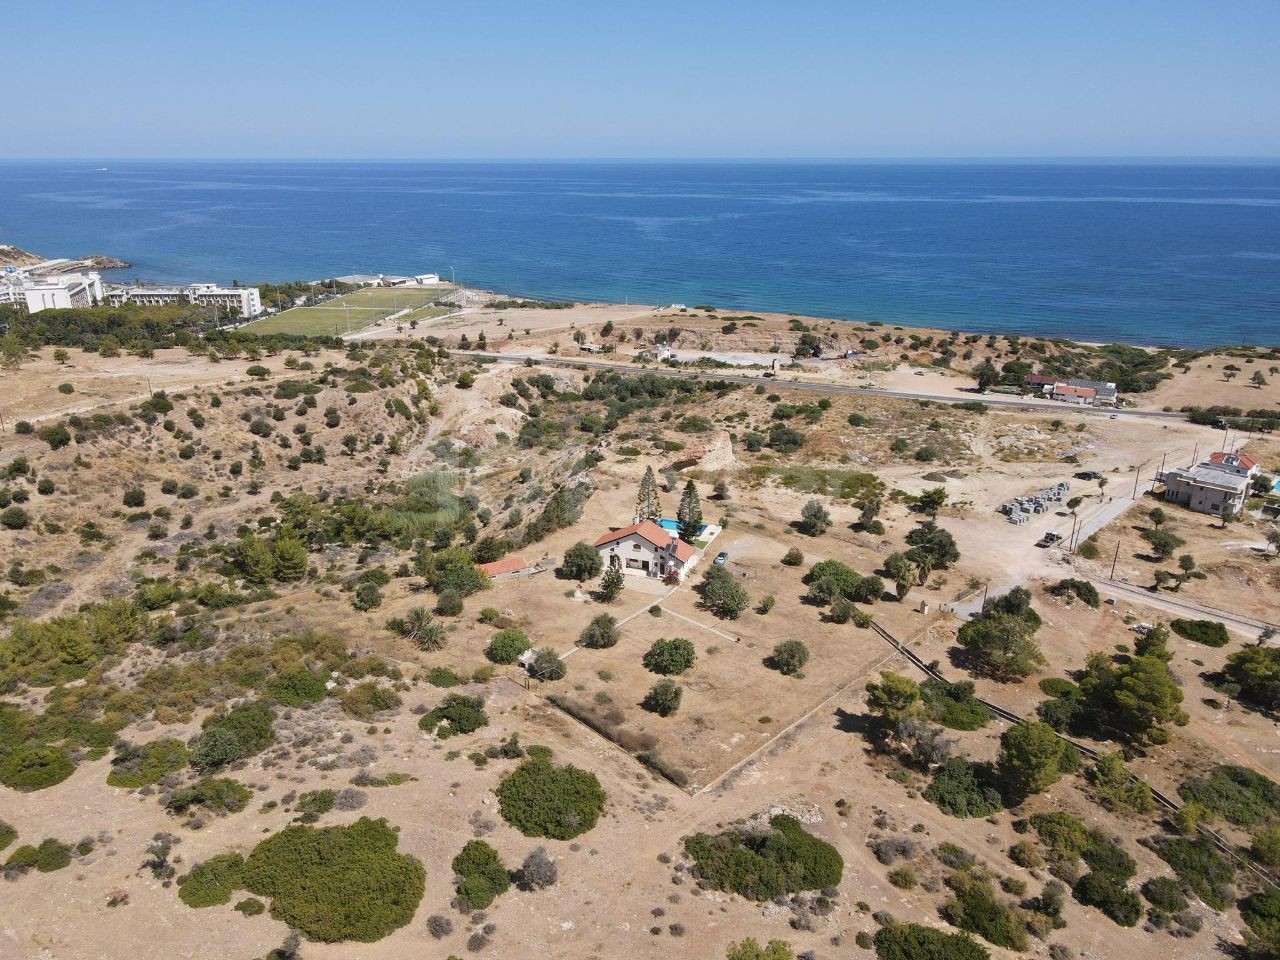 THE ONLY AUTHORIZED CYPRUS KYRENIA ÇATALKÖY LAND PLOT WITH 5 Decares 2600 A2 MOUNTAIN HOUSE WITH SEA VIEW ** 